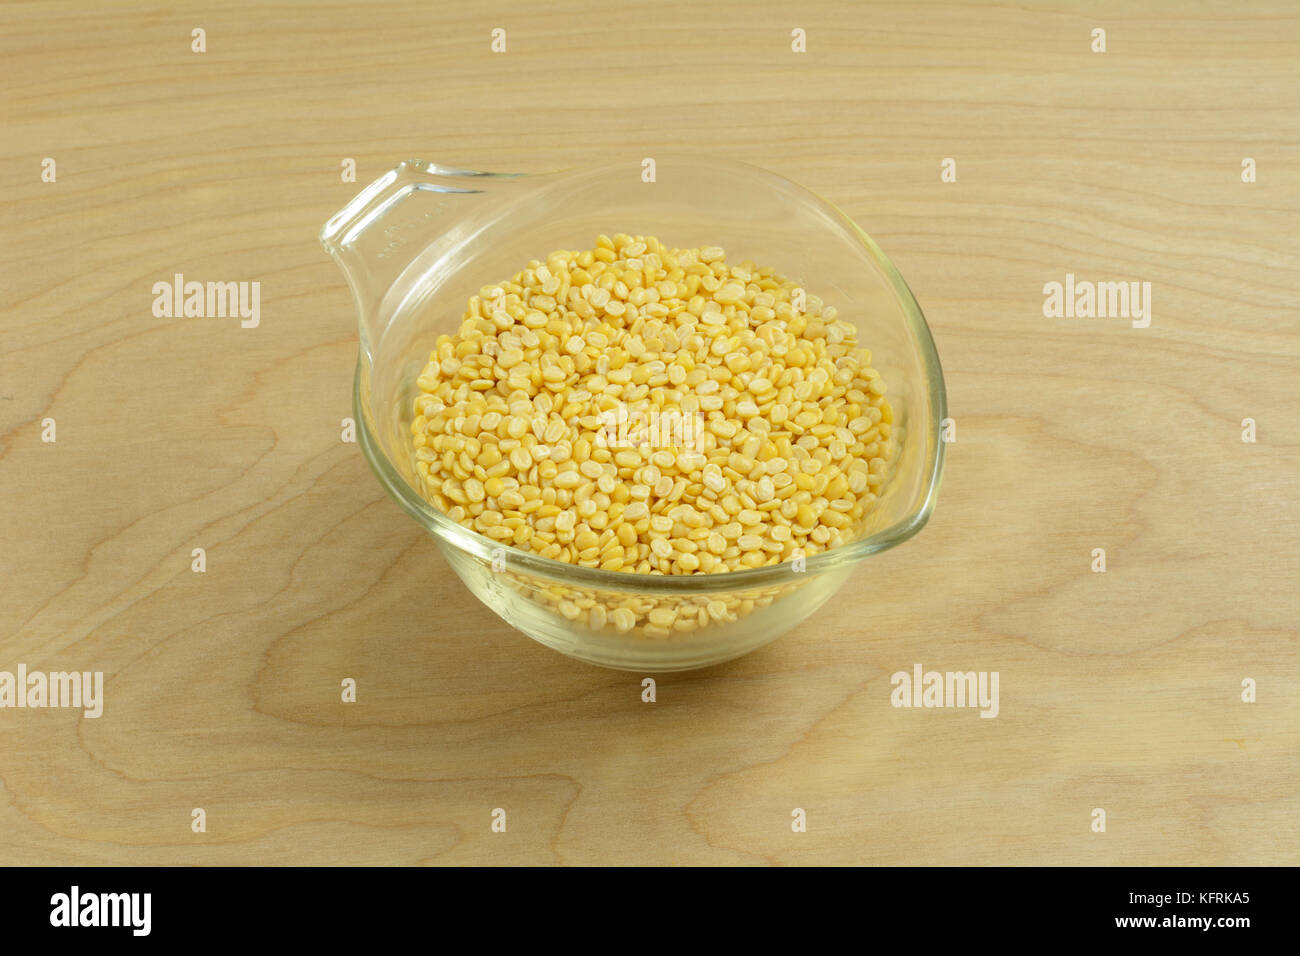 Glass measuring cup full of moong dal or yellow split mung beans Stock Photo